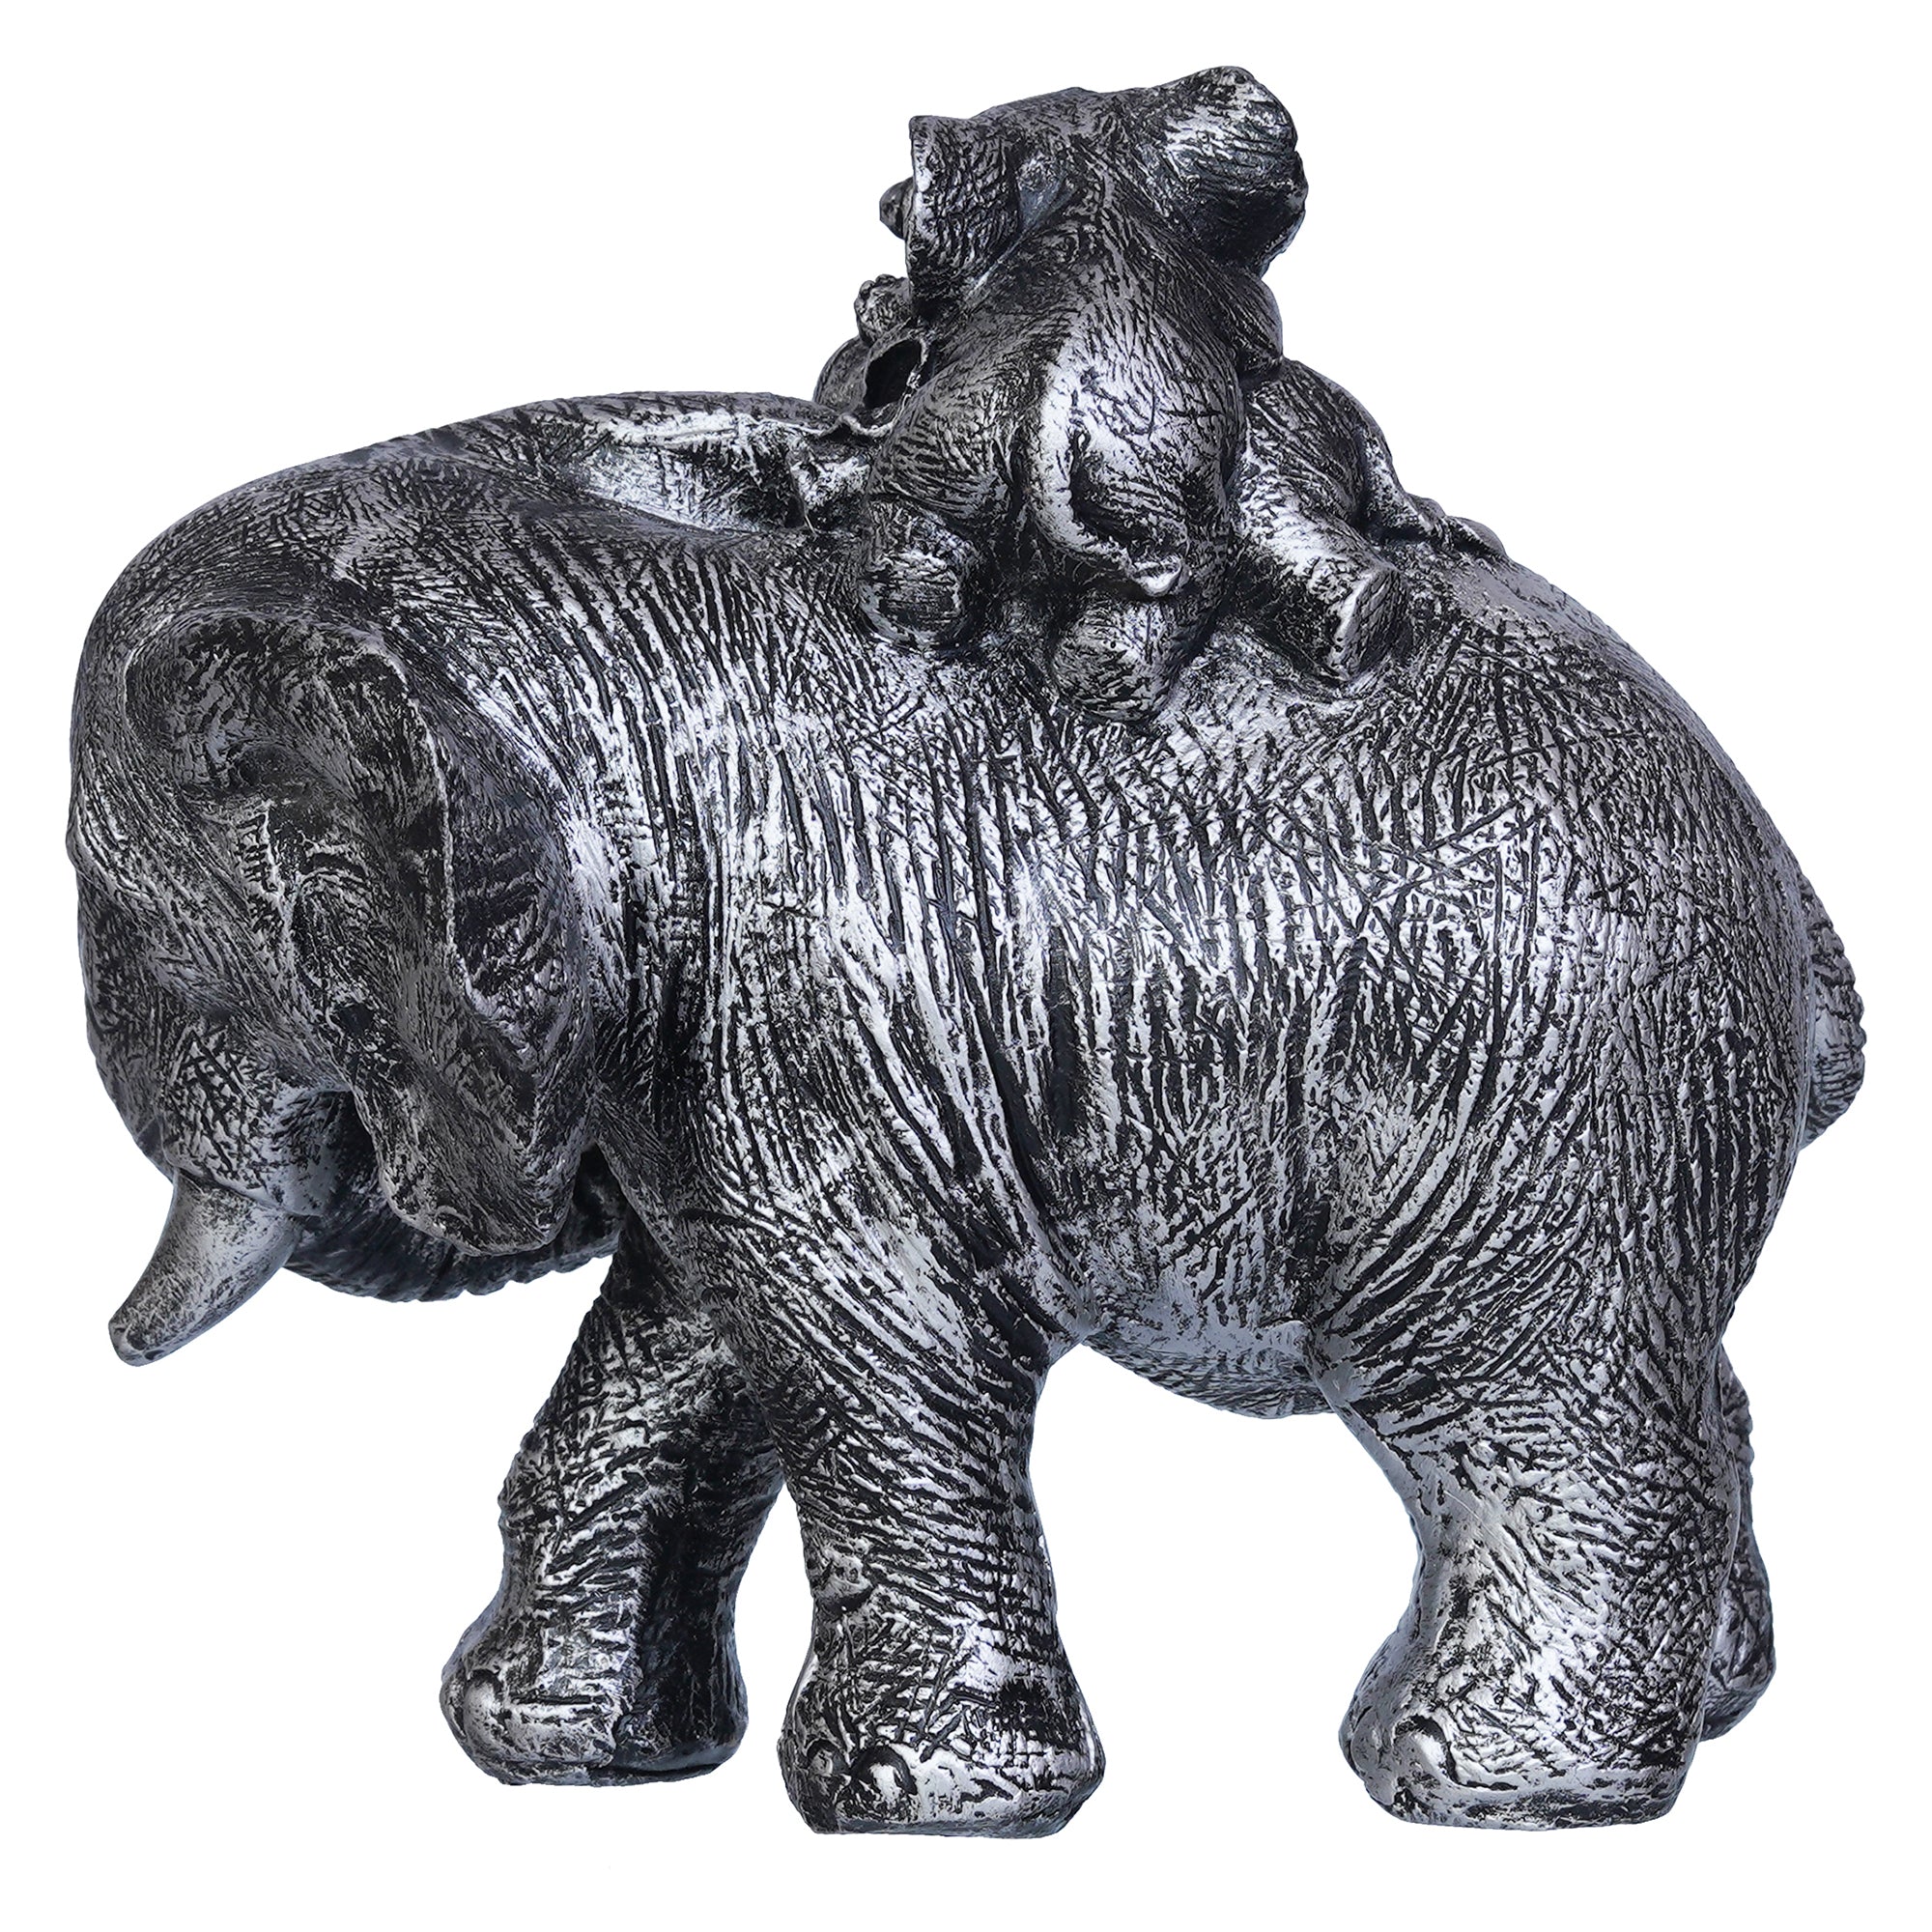 Polyresin Elephant Statue with Baby Elephant on his Back Decorative Showpiece 7